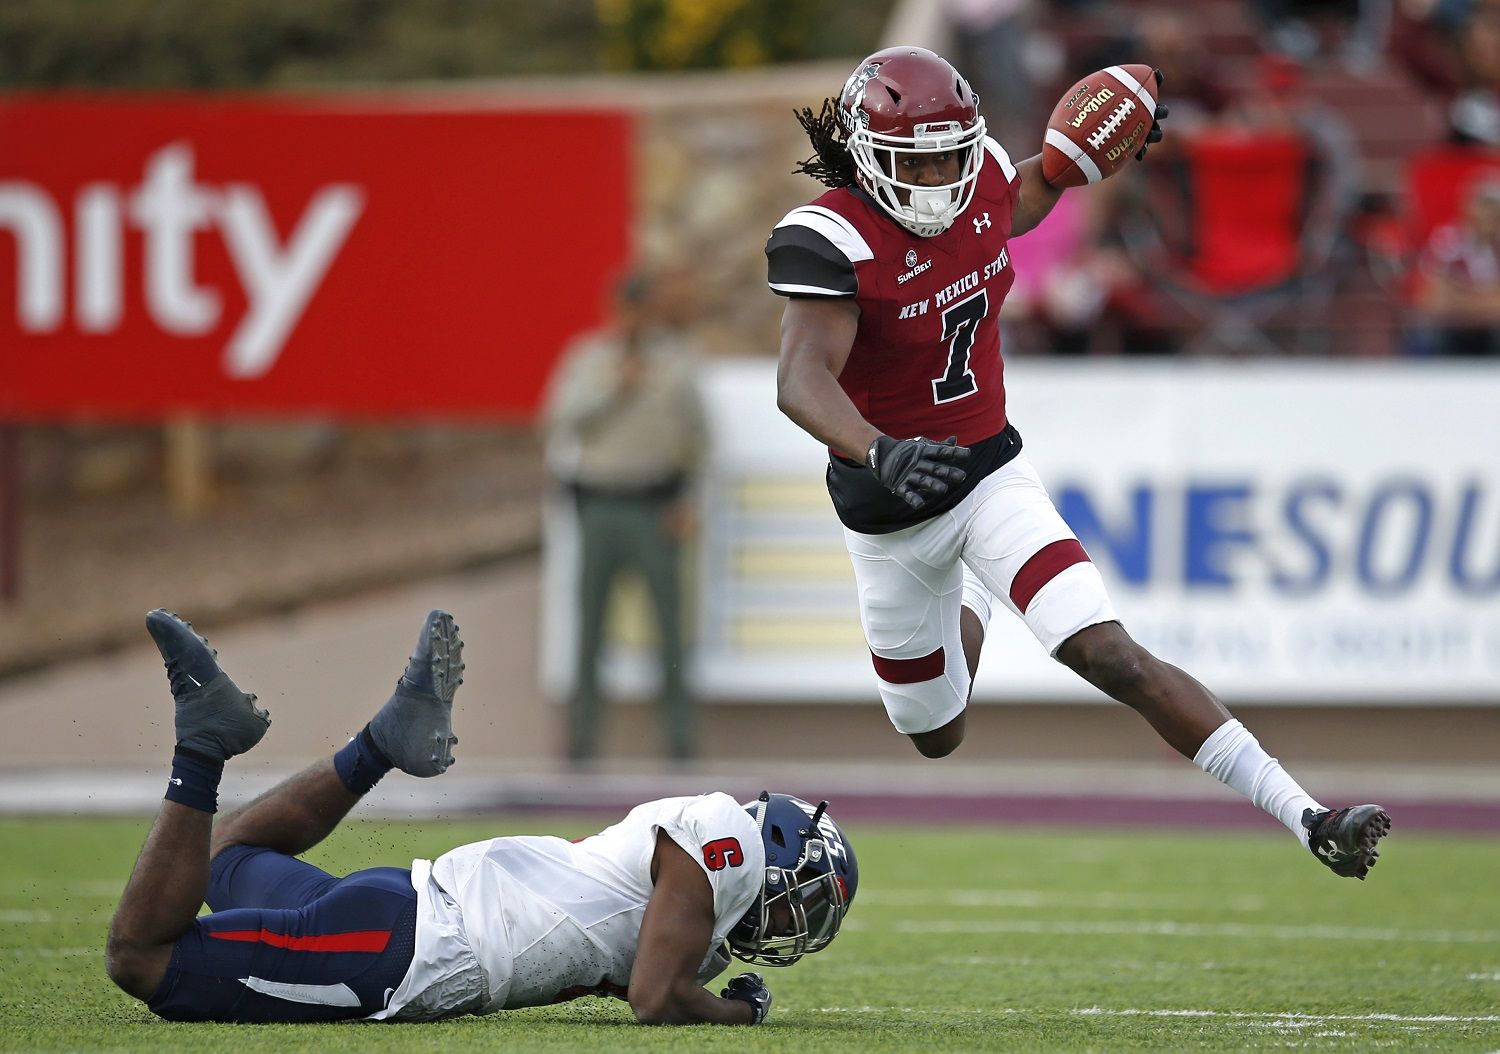 New Mexico State wide receiver Gregory Hogan (7) avoids the tackle attempt by South Alabama safety Nigel Lawrence (6) during the first half of an NCAA college football game in Las Cruces, N.M., Saturday, Dec. 2, 2017. (AP Photo/Andres Leighton)